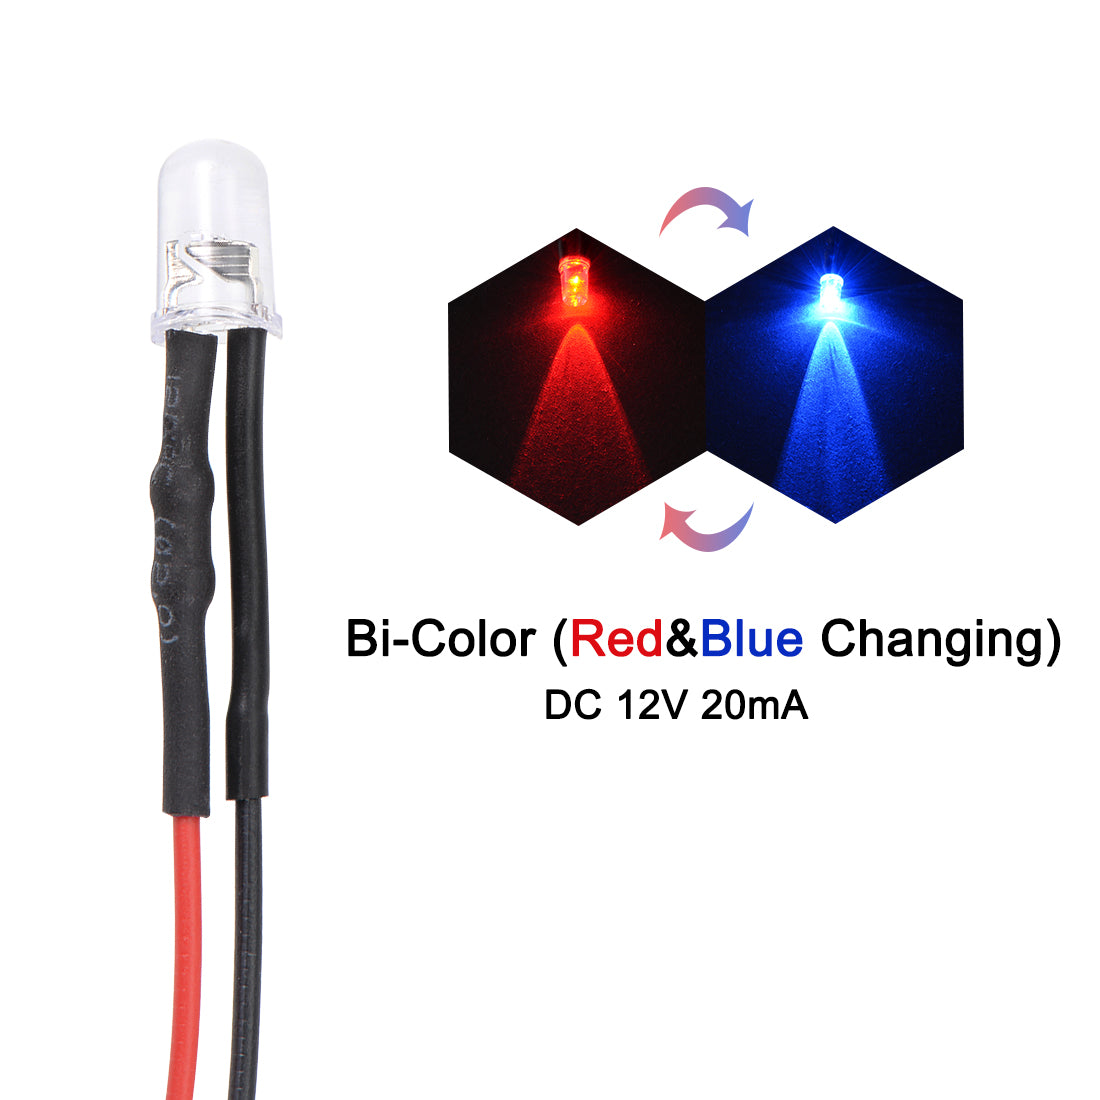 uxcell Uxcell 15Pcs DC 12V 5mm Pre Wired LED, Flashing Bi-Color (Red&Blue Changing) Light Round Top Clear Lens, Light Emitting Diodes with Edge